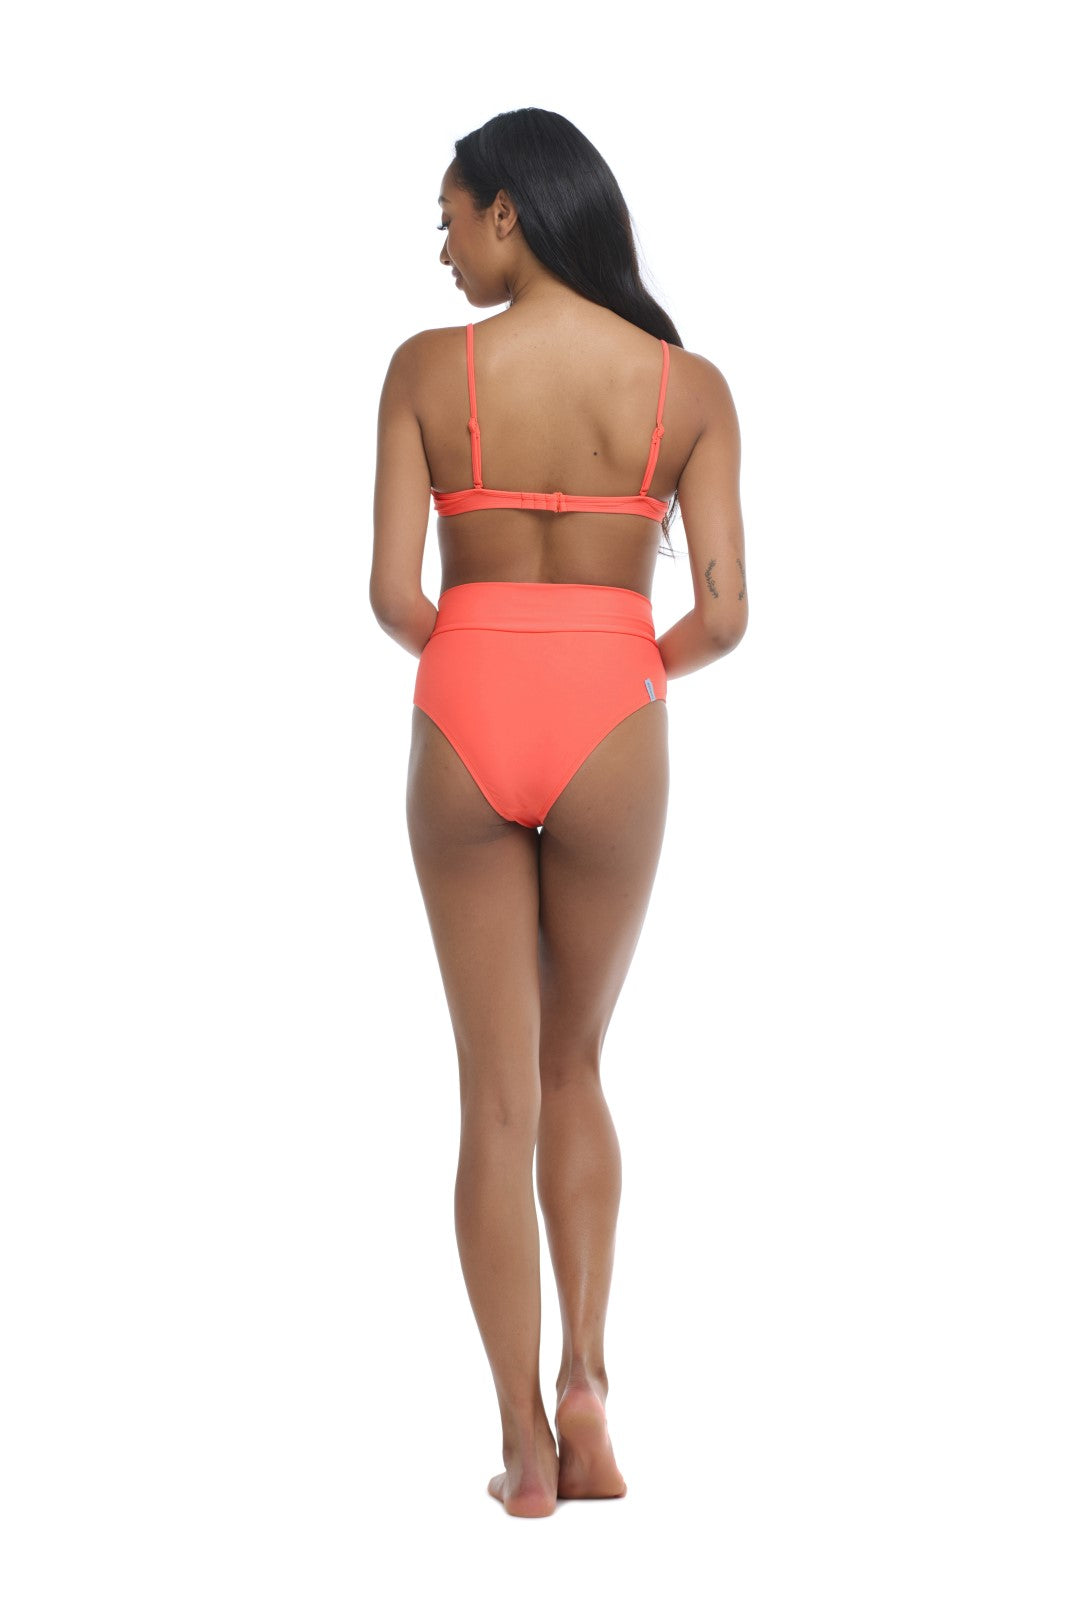 Stockings Woodstock Body Glove in Coral color